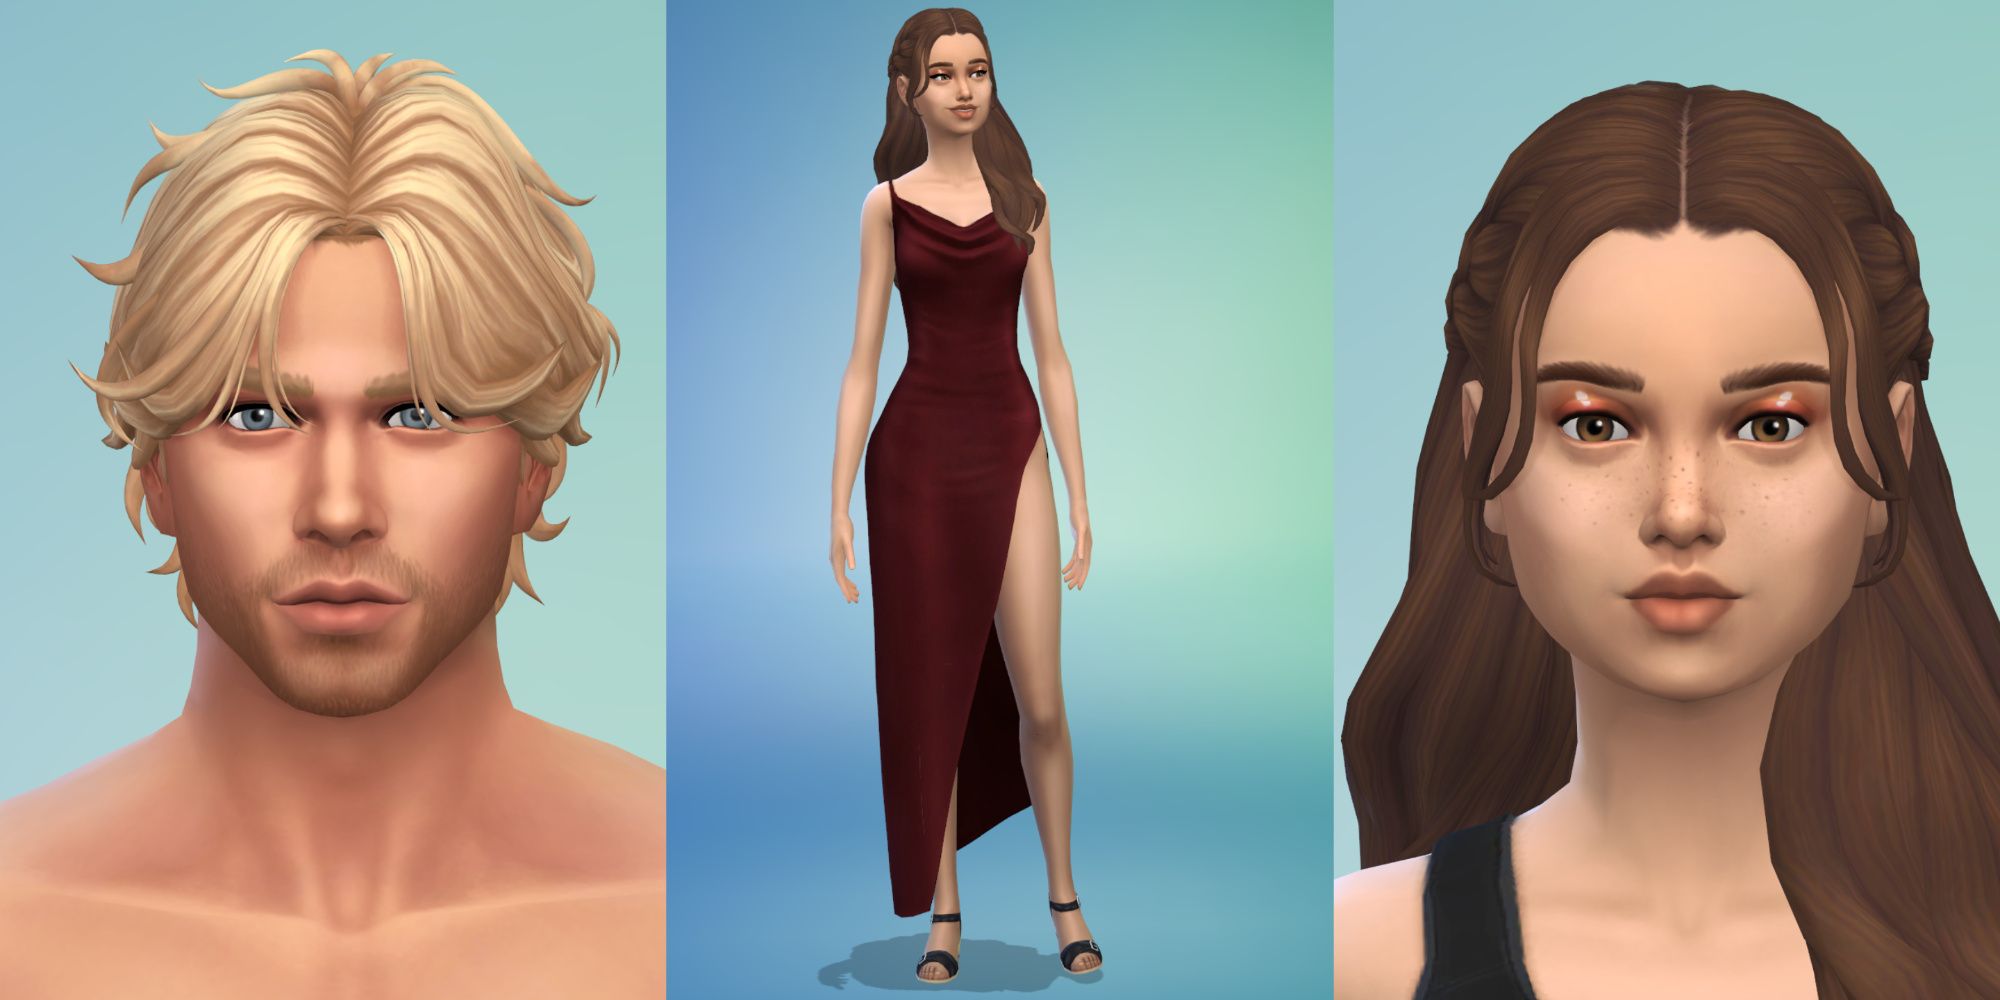 New Curly Hair Coming to Sims 4: SDX Drop Tomorrow! (Sims News) - YouTube